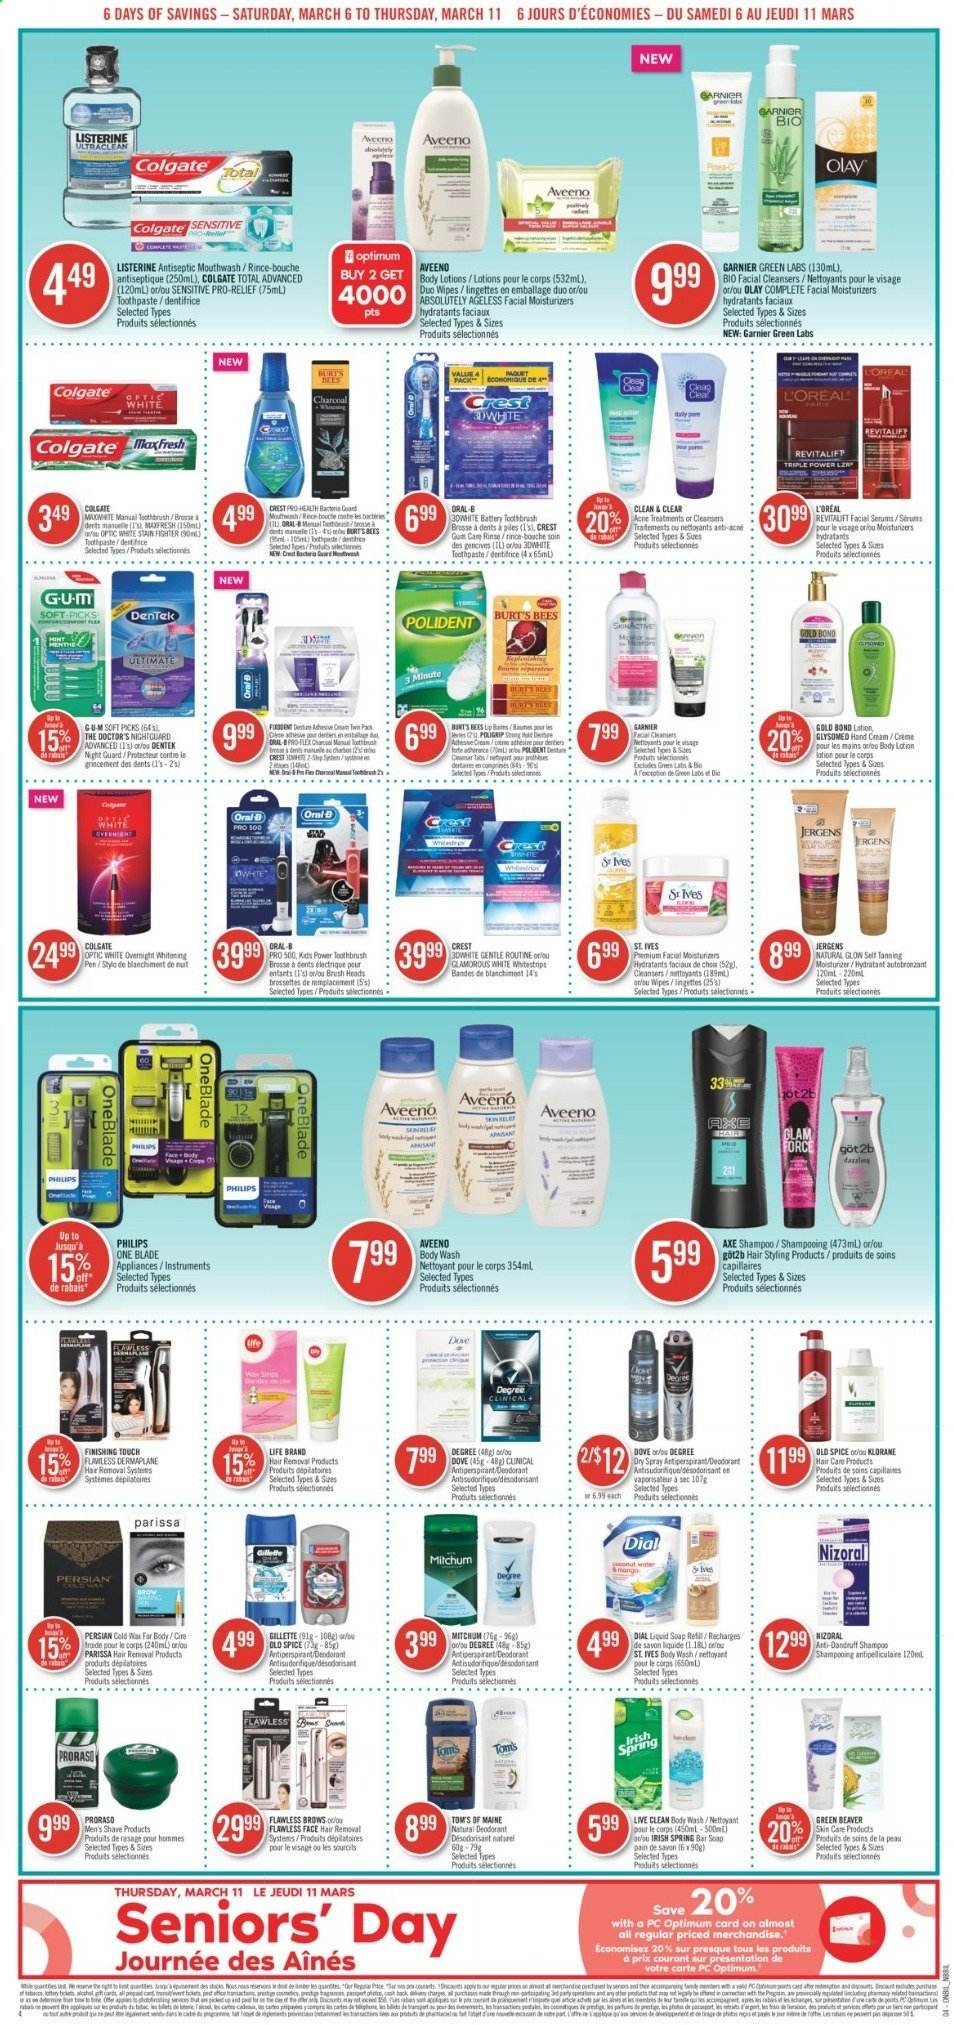 thumbnail - Shoppers Drug Mart Flyer - March 06, 2021 - March 11, 2021 - Sales products - Mars, spice, wipes, Aveeno, body wash, Dial, soap, toothbrush, toothpaste, mouthwash, Polident, Crest, L’Oréal, moisturizer, Olay, Clean & Clear, Klorane, body lotion, hand cream, Jergens, anti-perspirant, hair removal, Garnier, Listerine, shampoo, Old Spice, Oral-B, deodorant. Page 4.